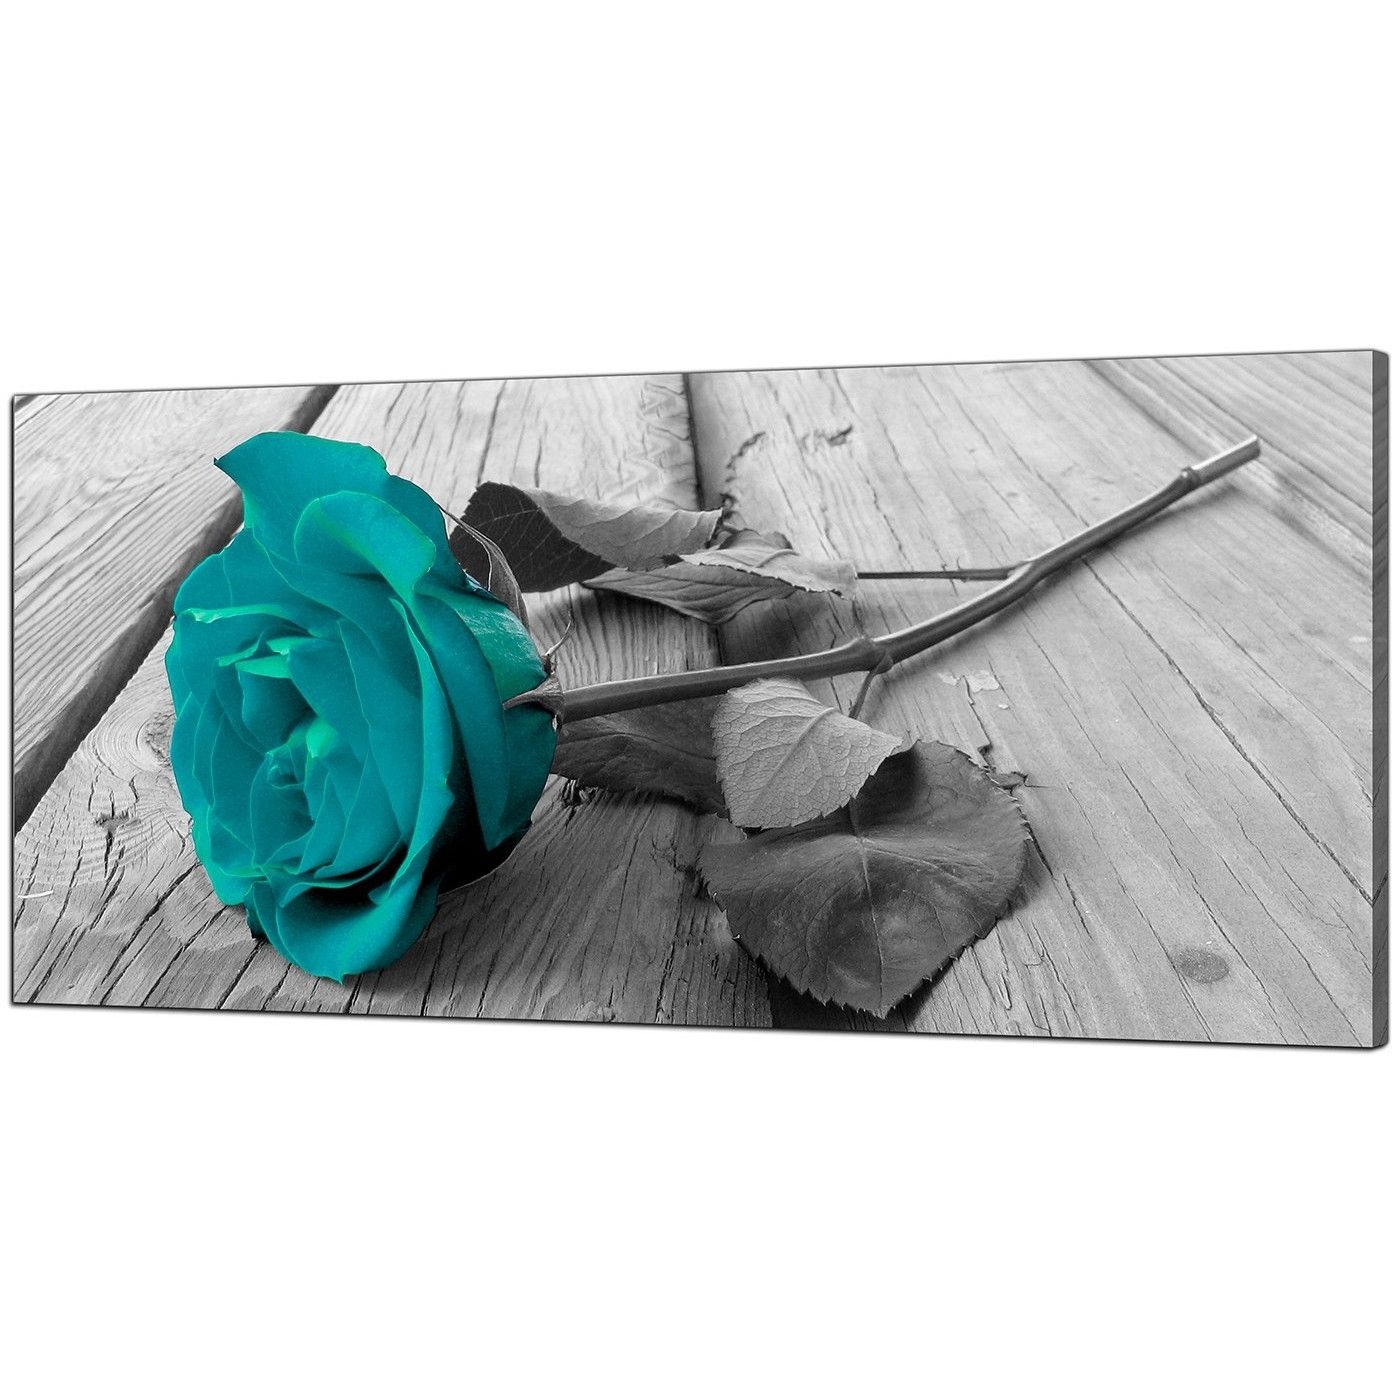 Black And Teal Wall Art In Recent Modern Black And White Canvas Wall Art Of A Teal Rose Flower (View 1 of 15)